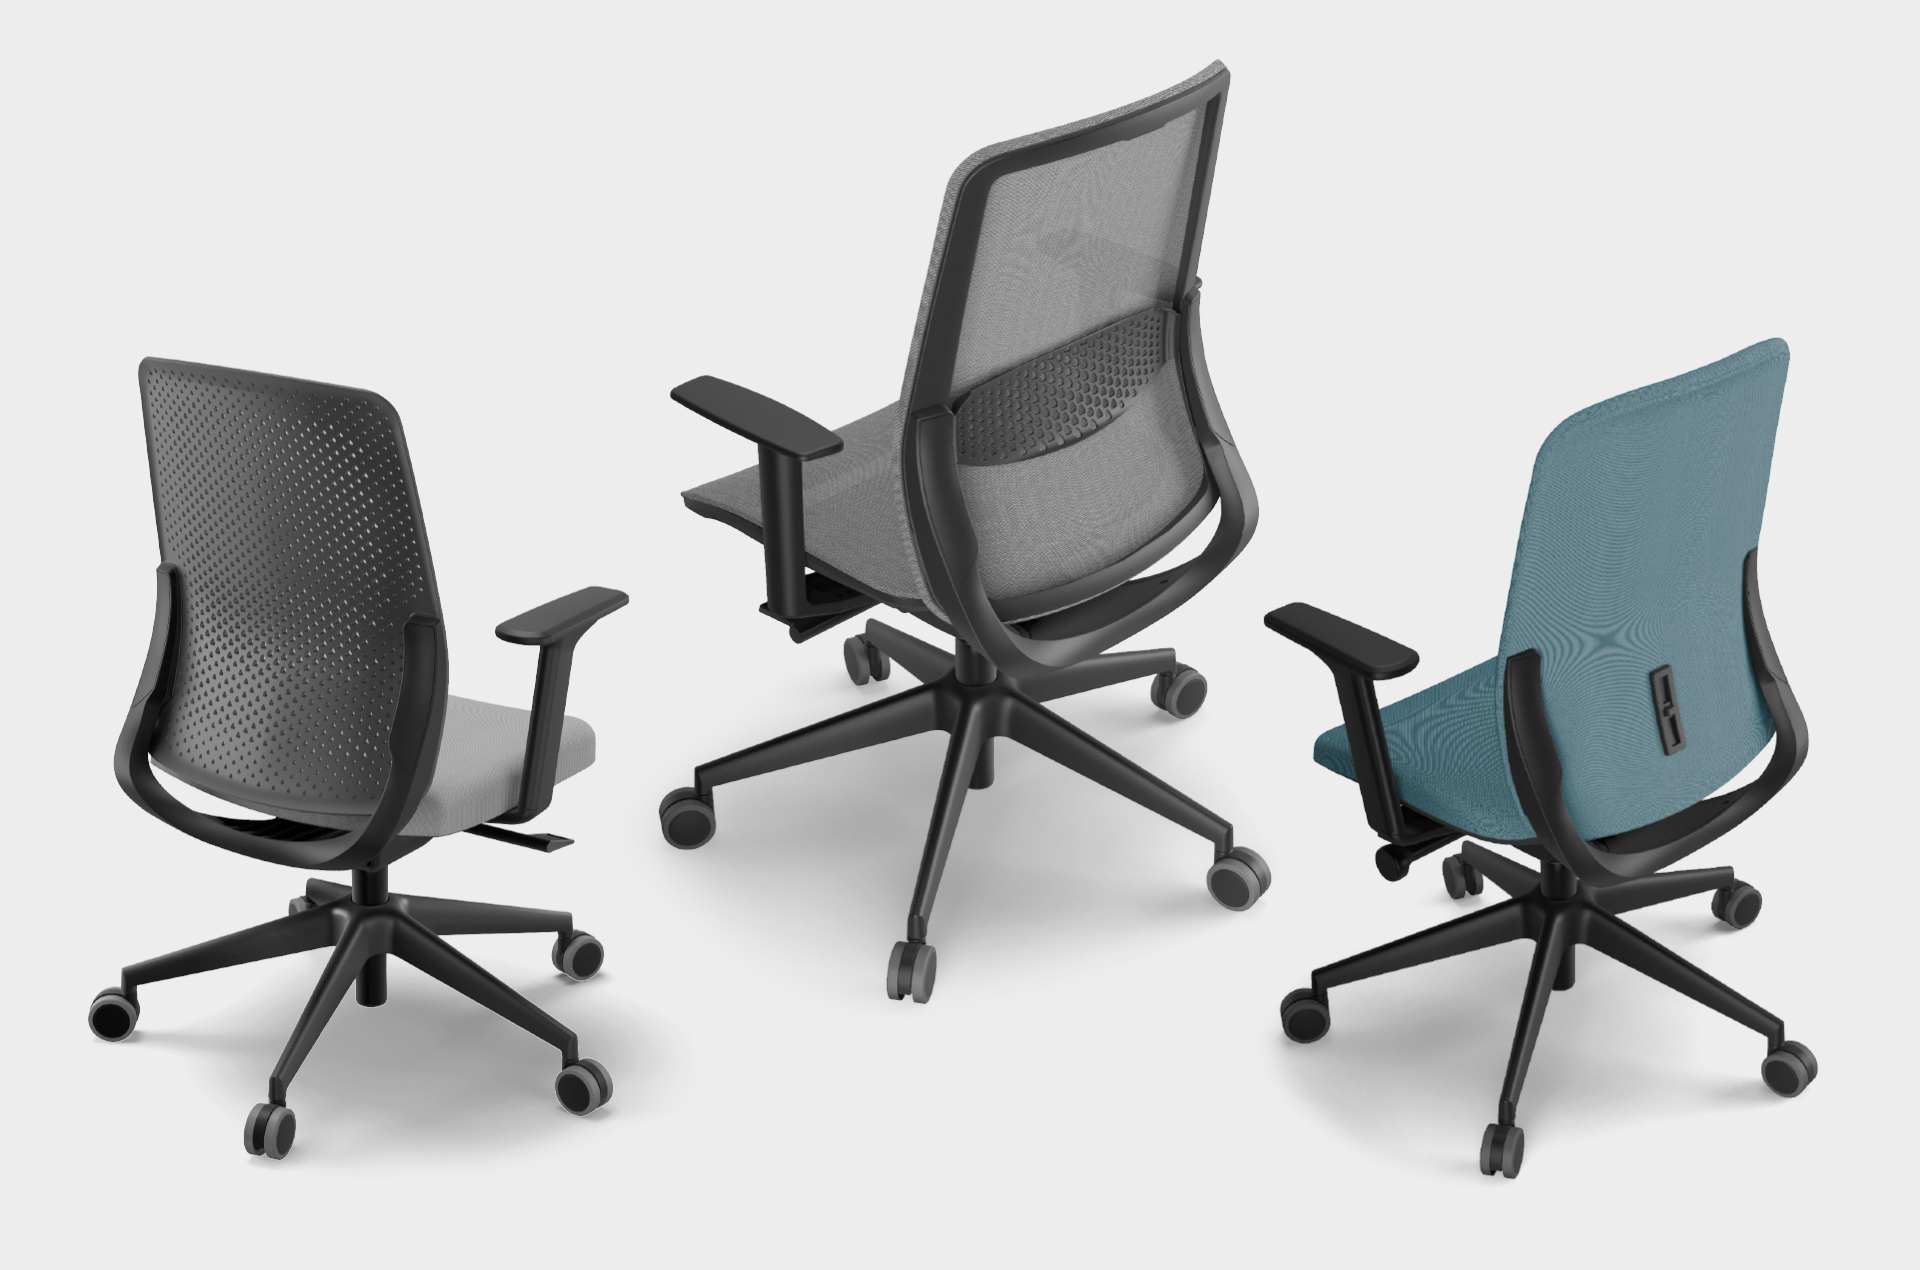 ntime-dynamism-and-versatility-for-the-perfect-seating-solution-preview